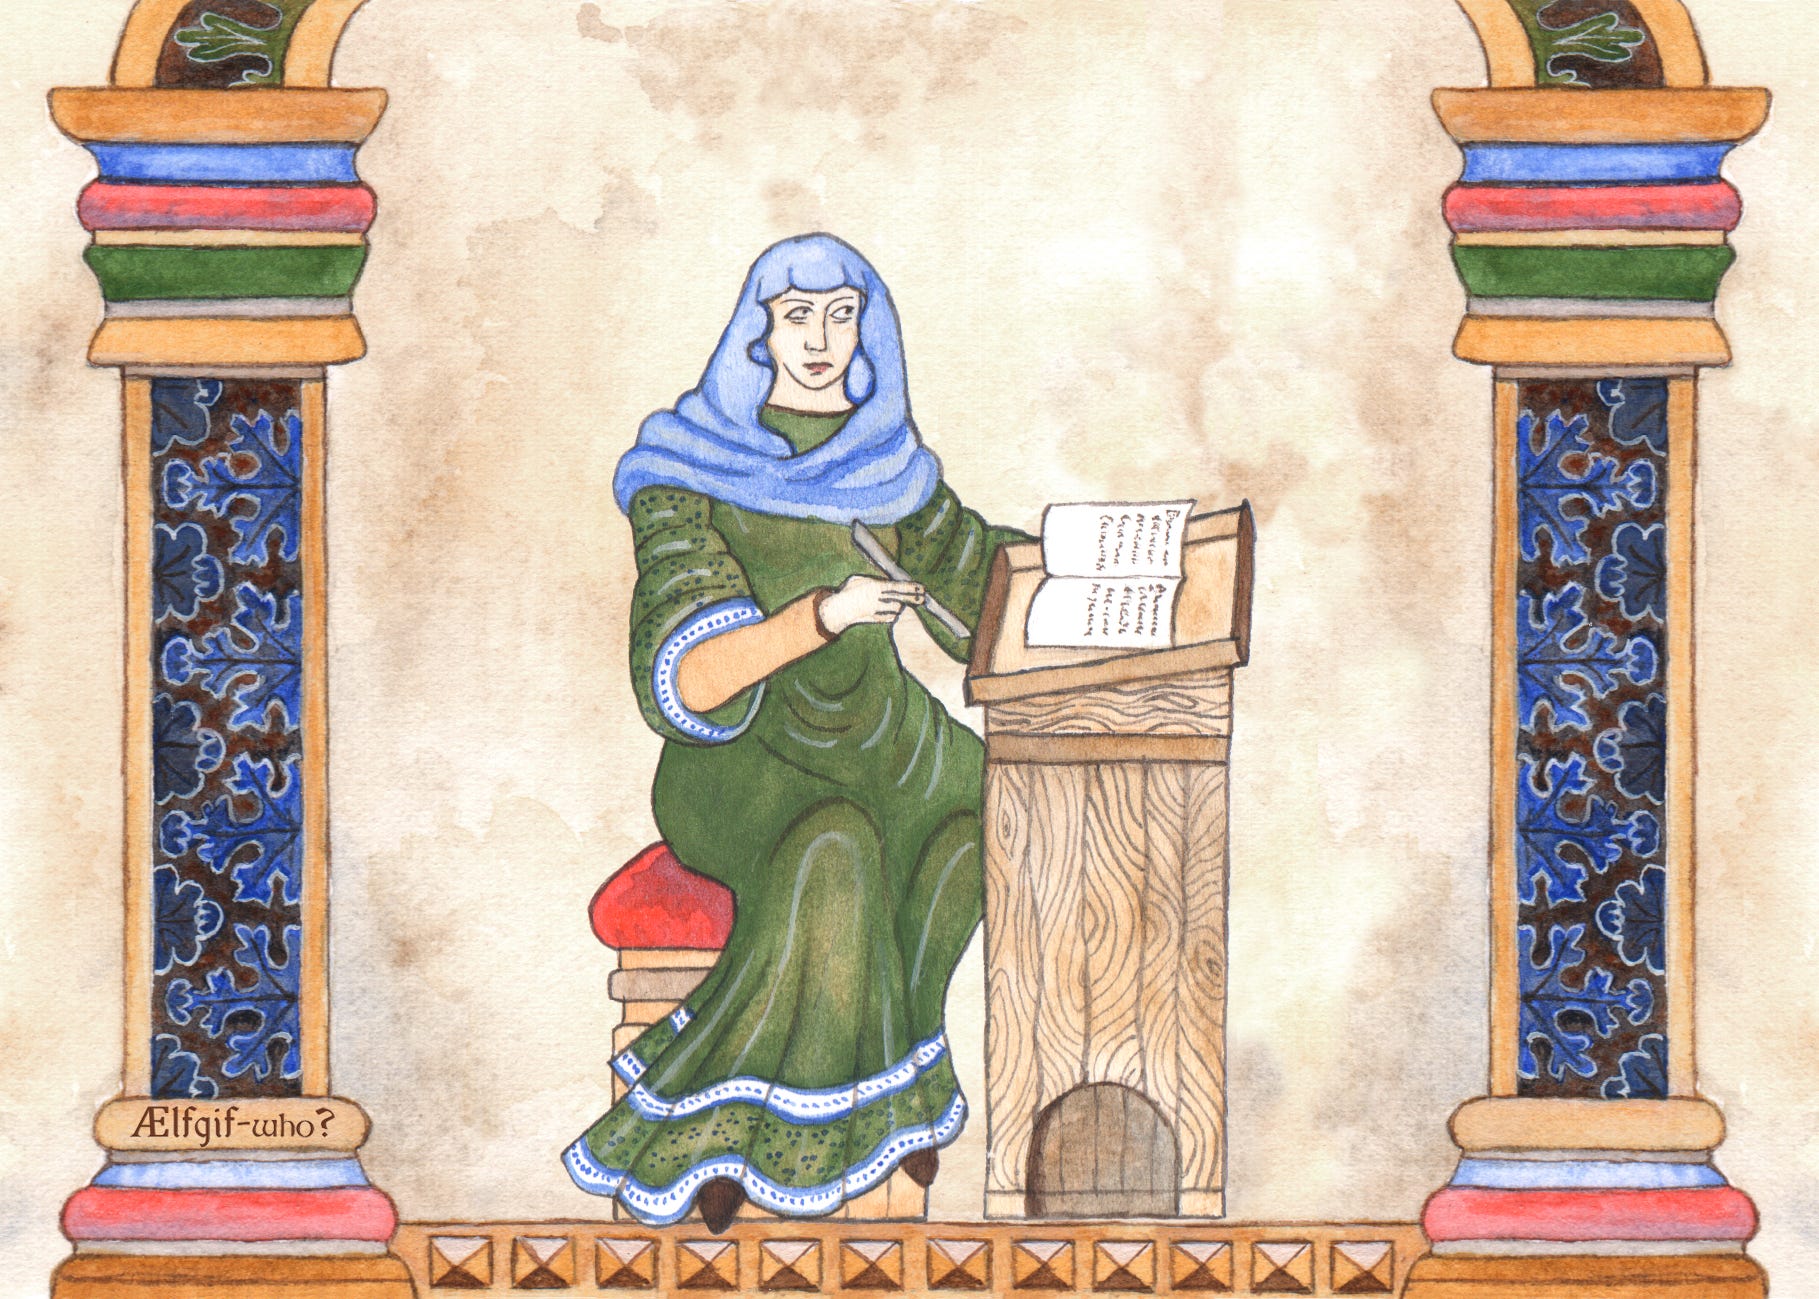 Burginda: An early medieval English woman well-versed in African poetry